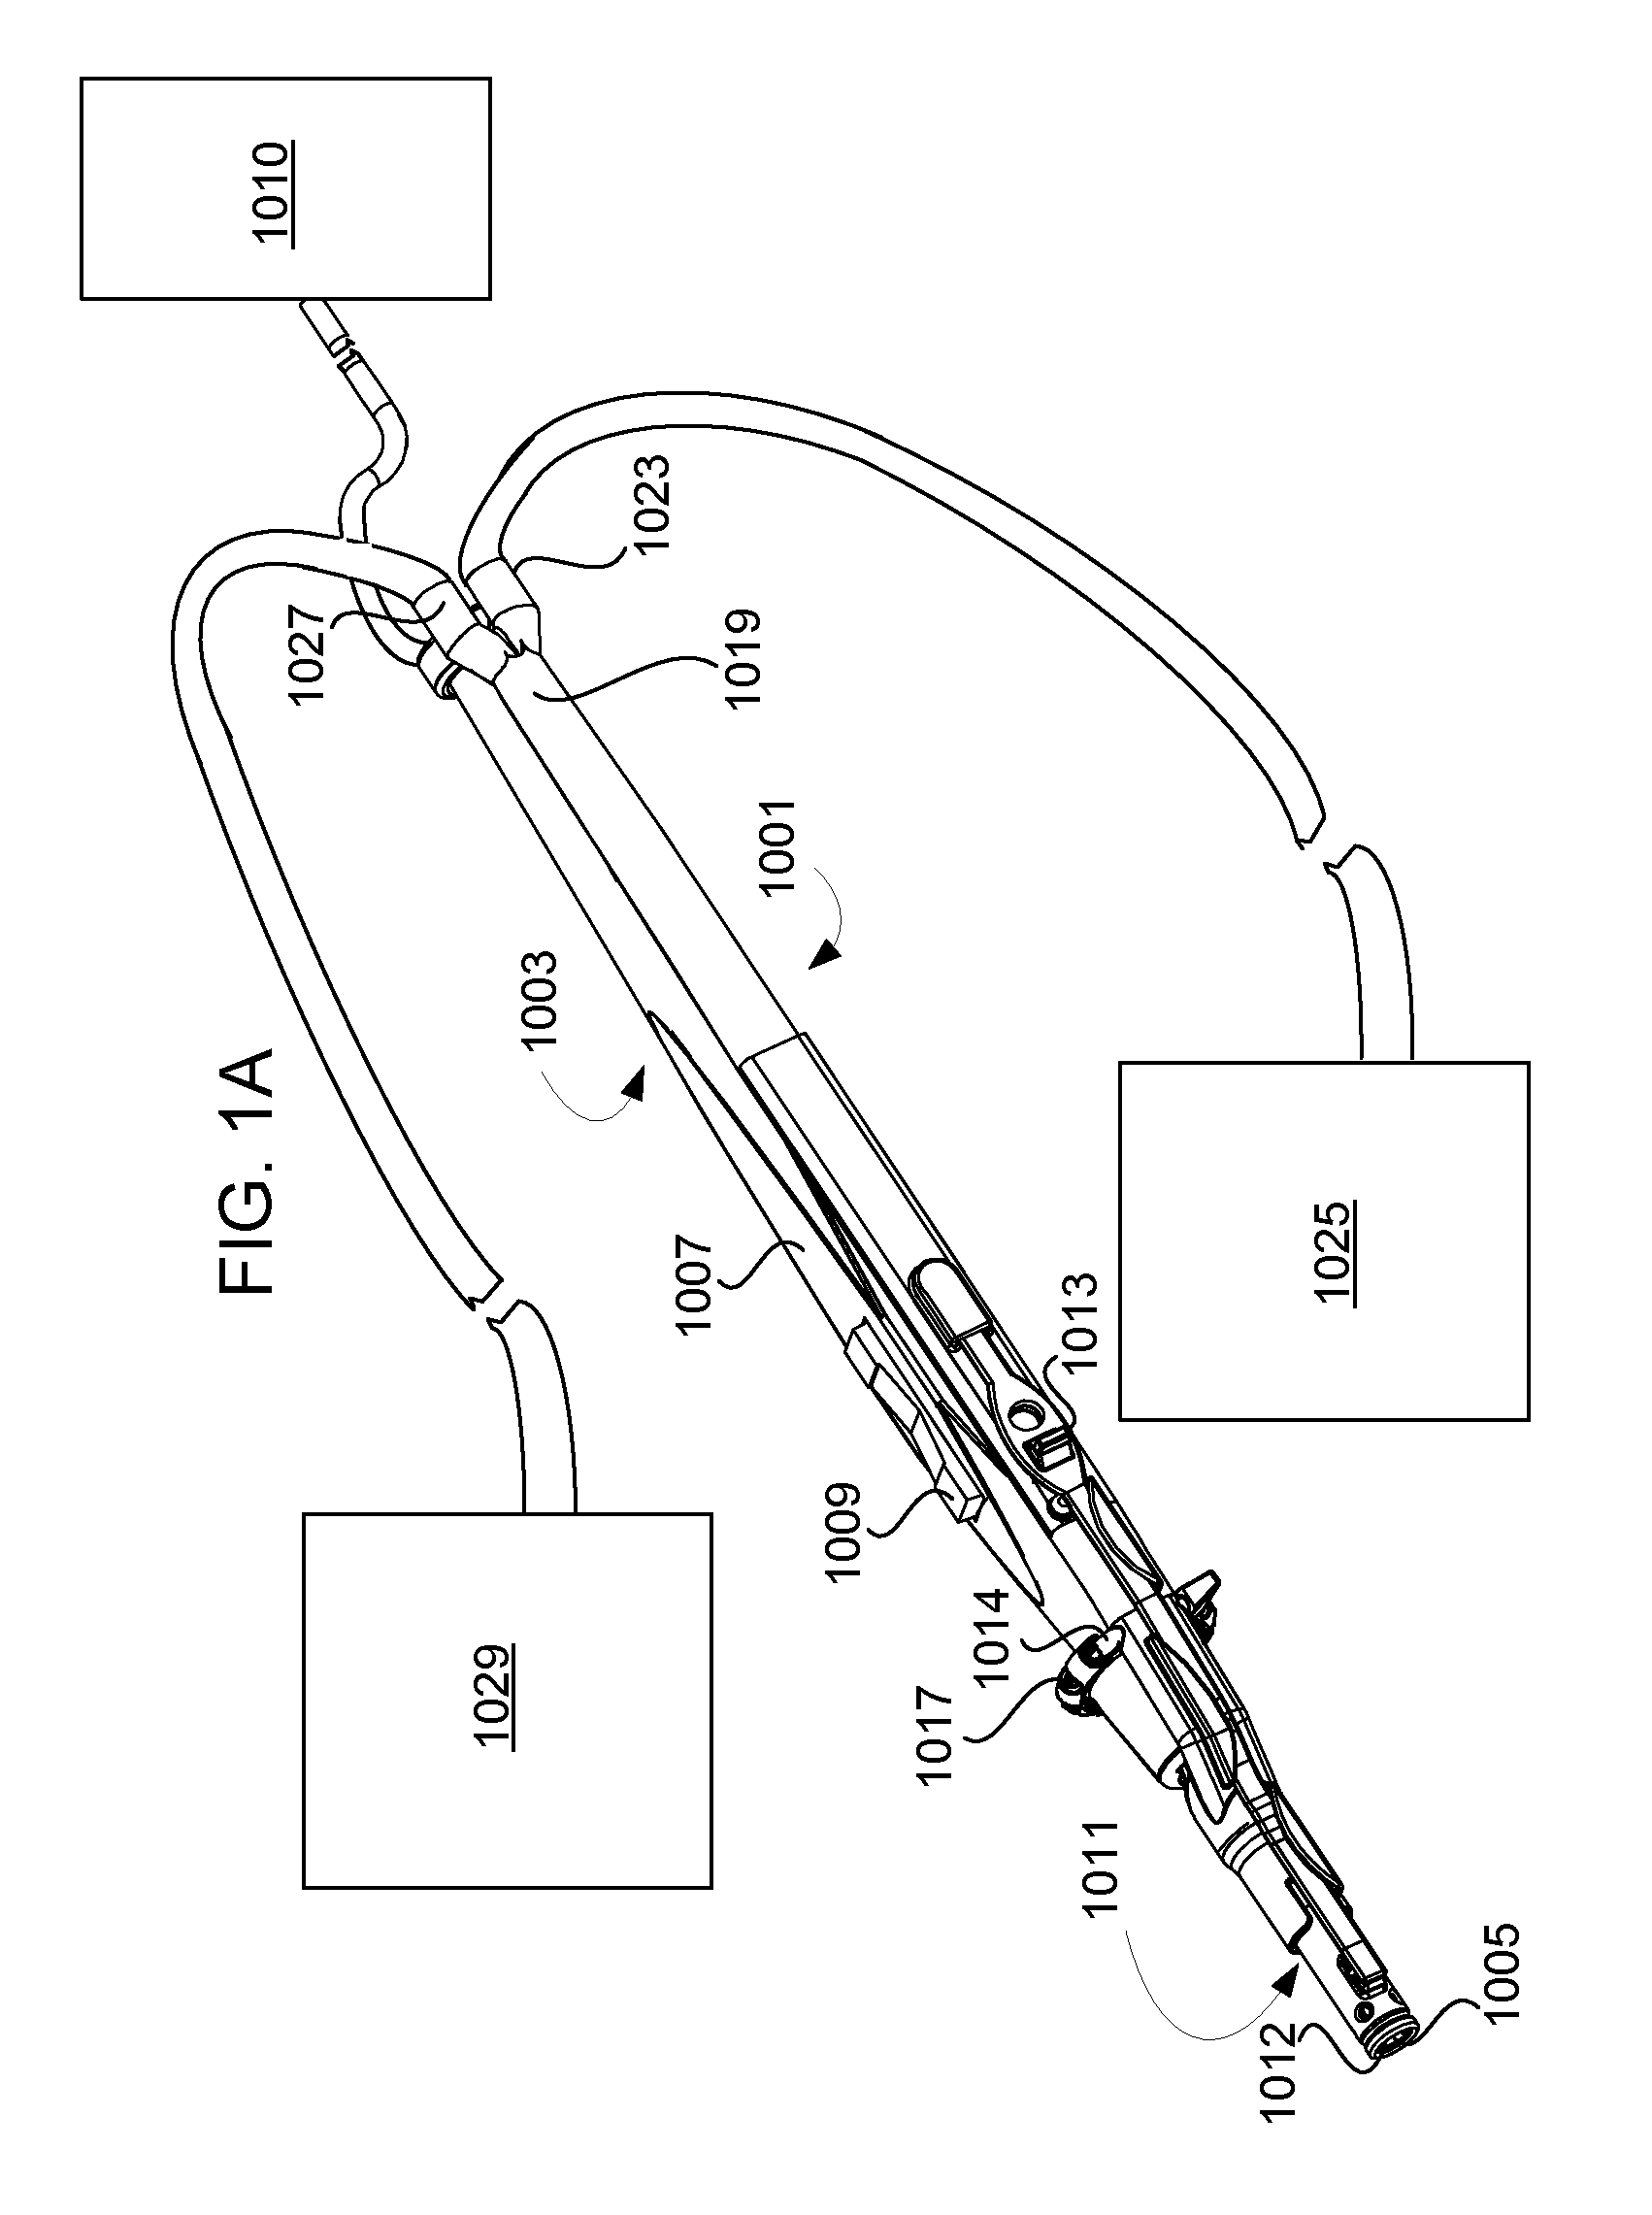 Apparatus and method for electrosurgical suction